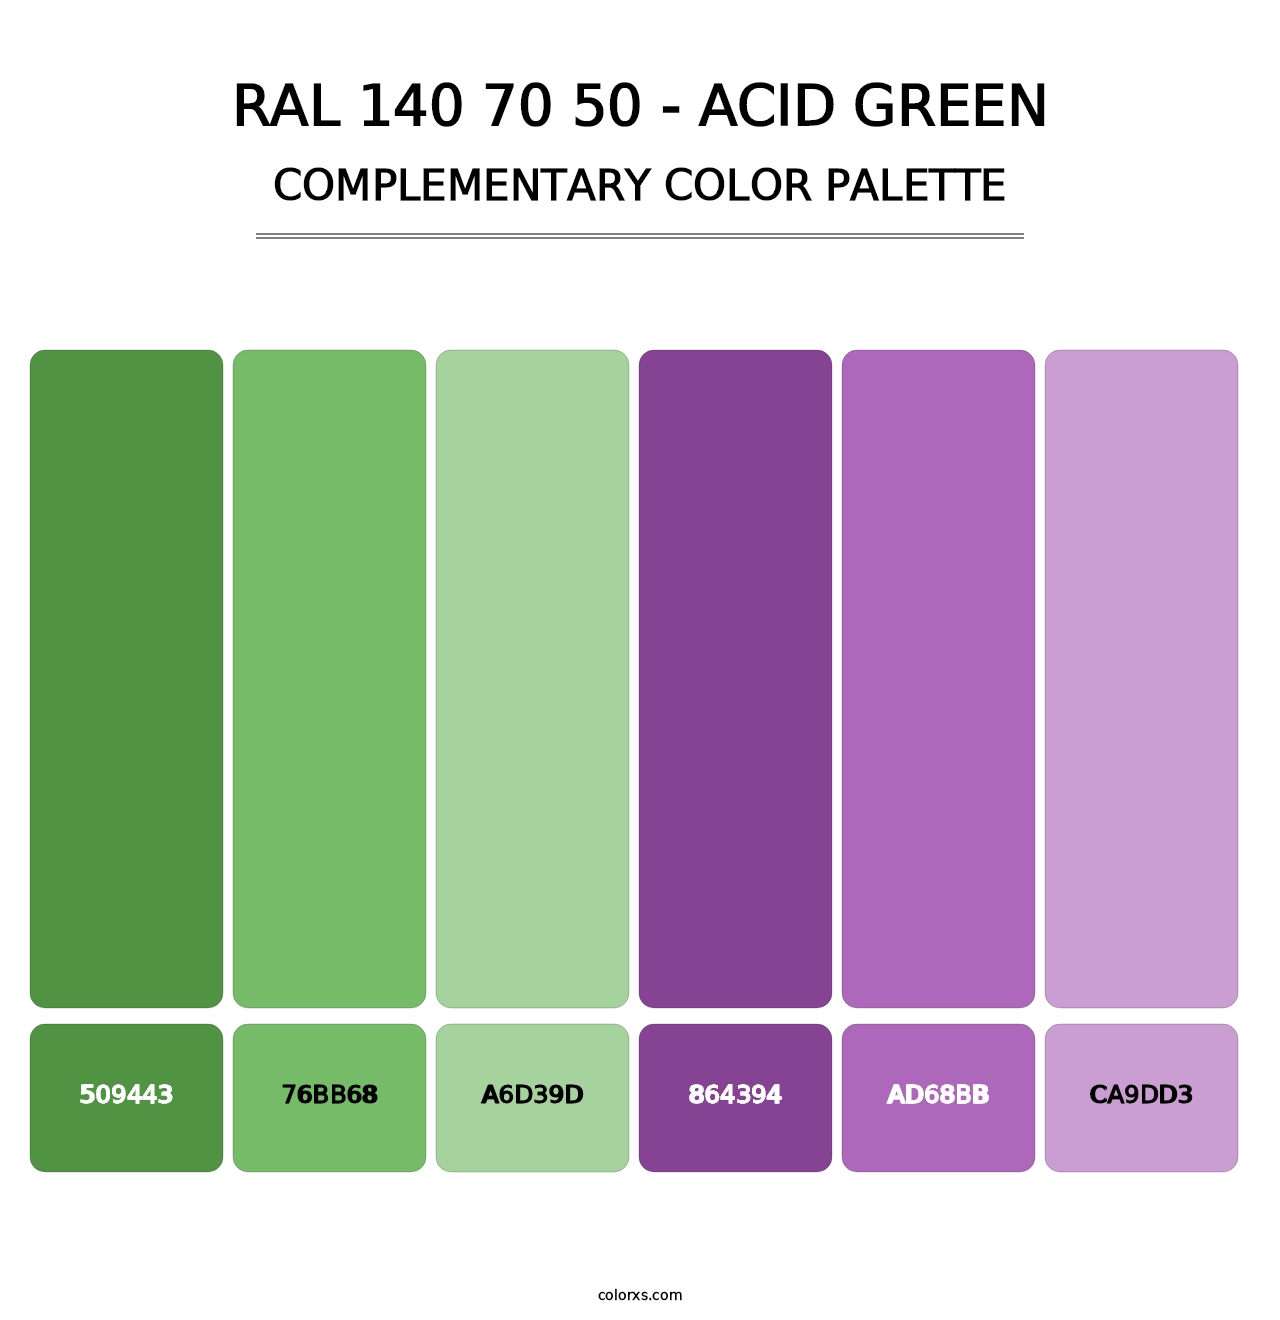 RAL 140 70 50 - Acid Green - Complementary Color Palette